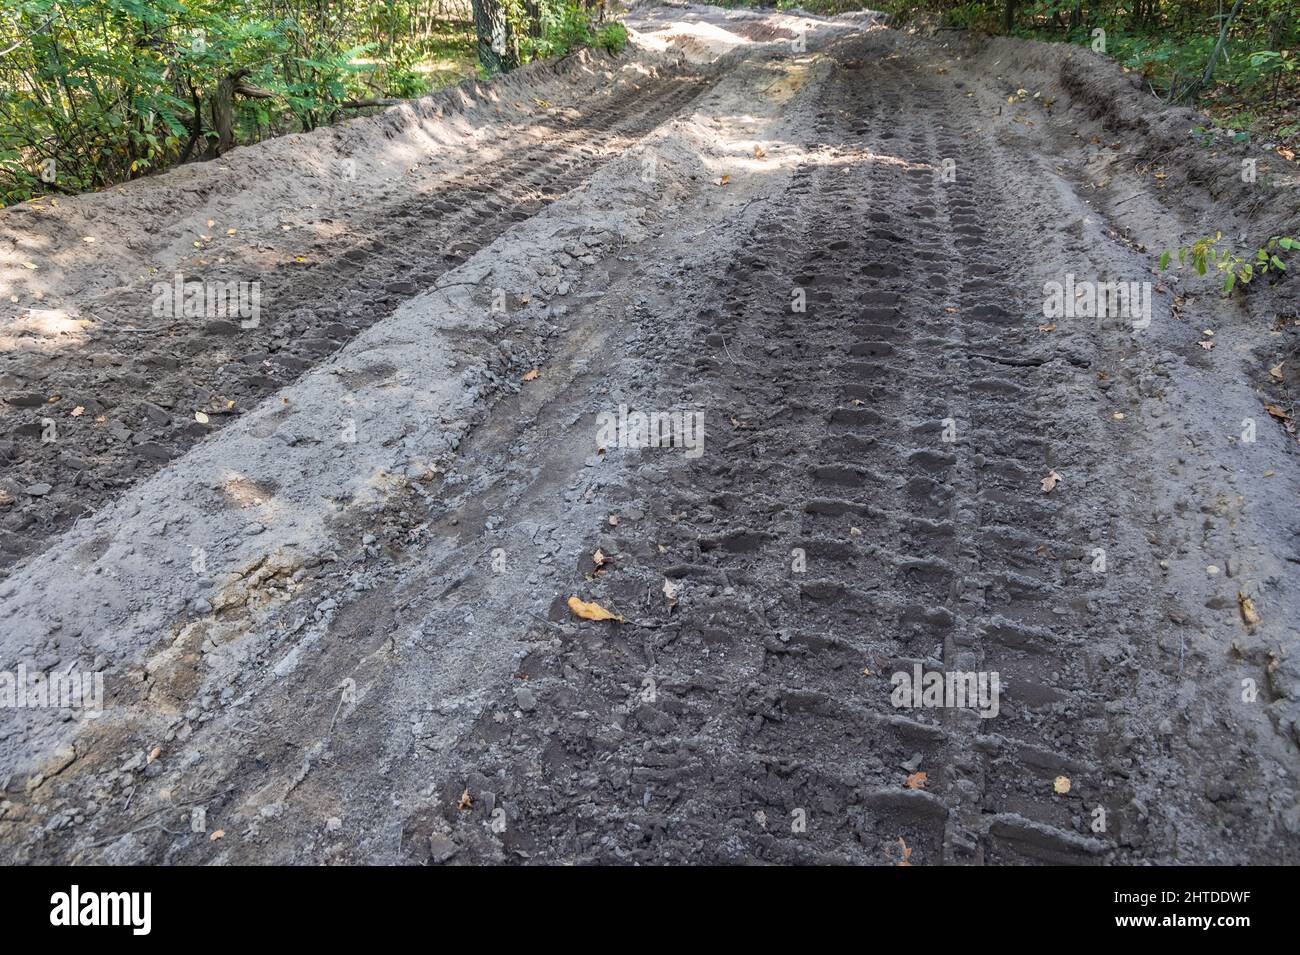 Caterpillar track on a tank road in forest near military ground in Sulejowek tow near Warsaw city in Masovia region of Poland Stock Photo